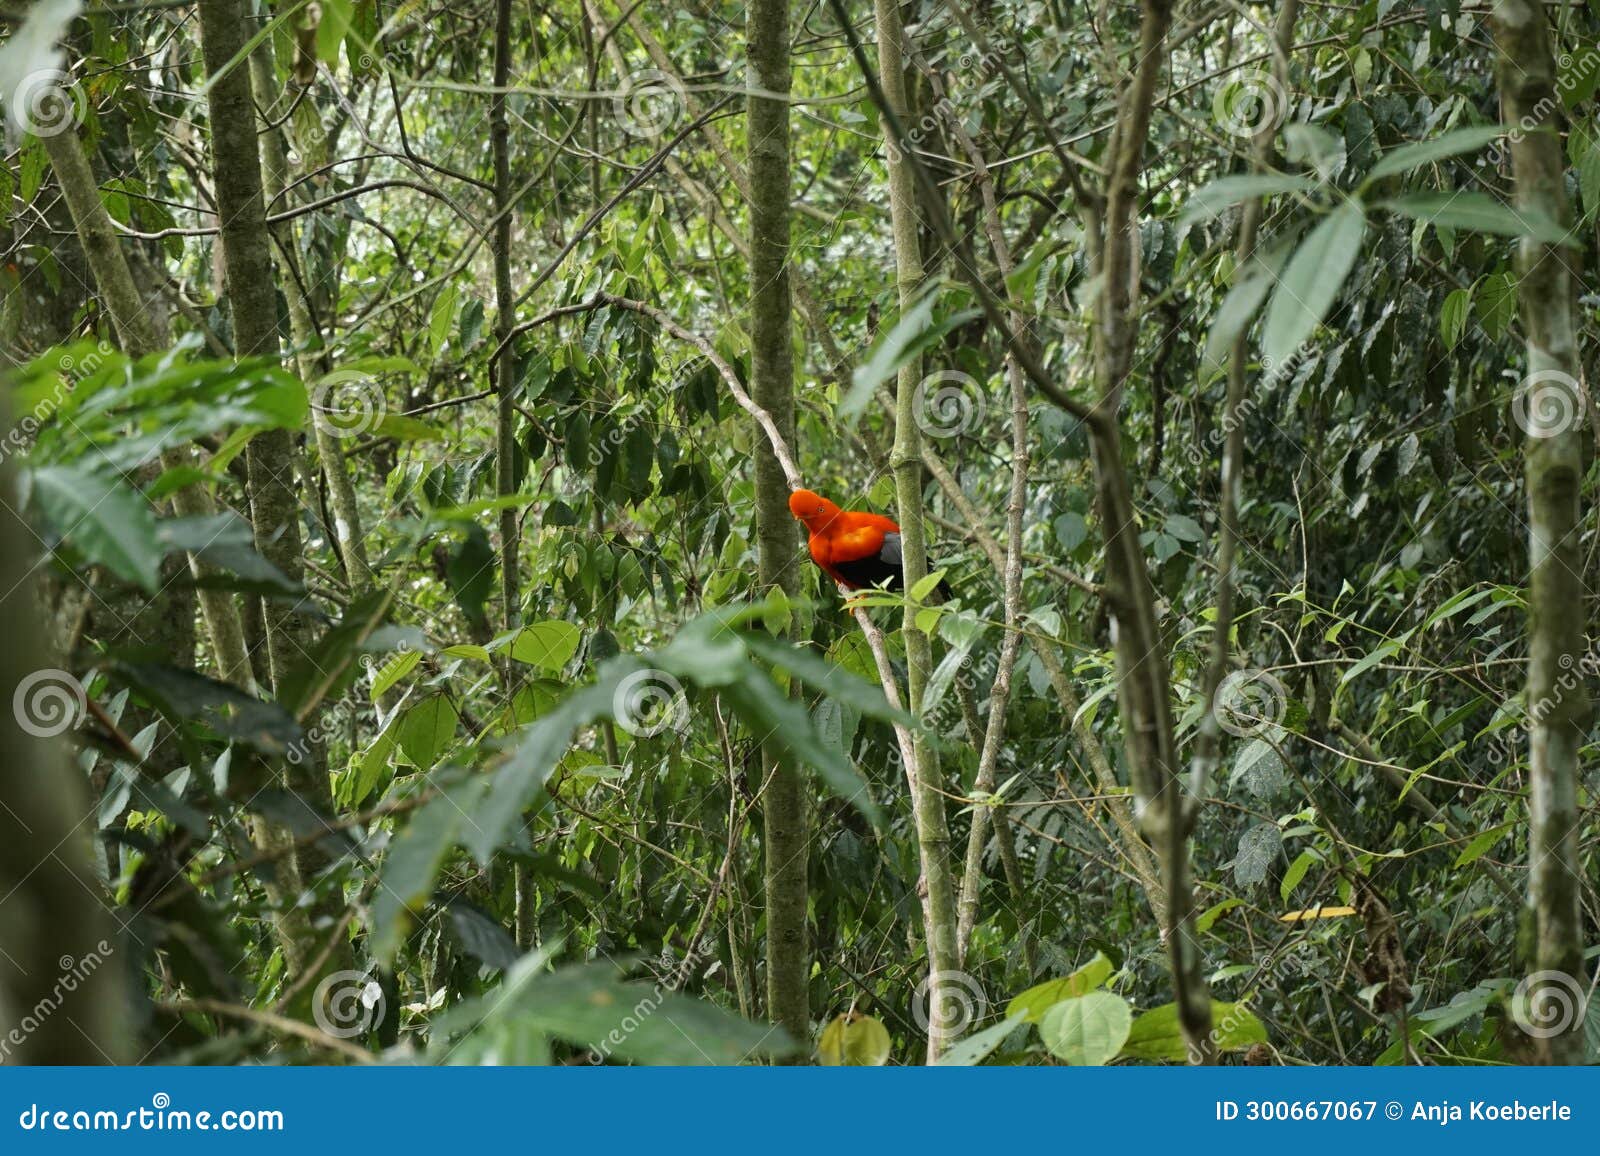 gallito de las rocas, famous red bird, spotted in jardin, eje cafetero, colombia